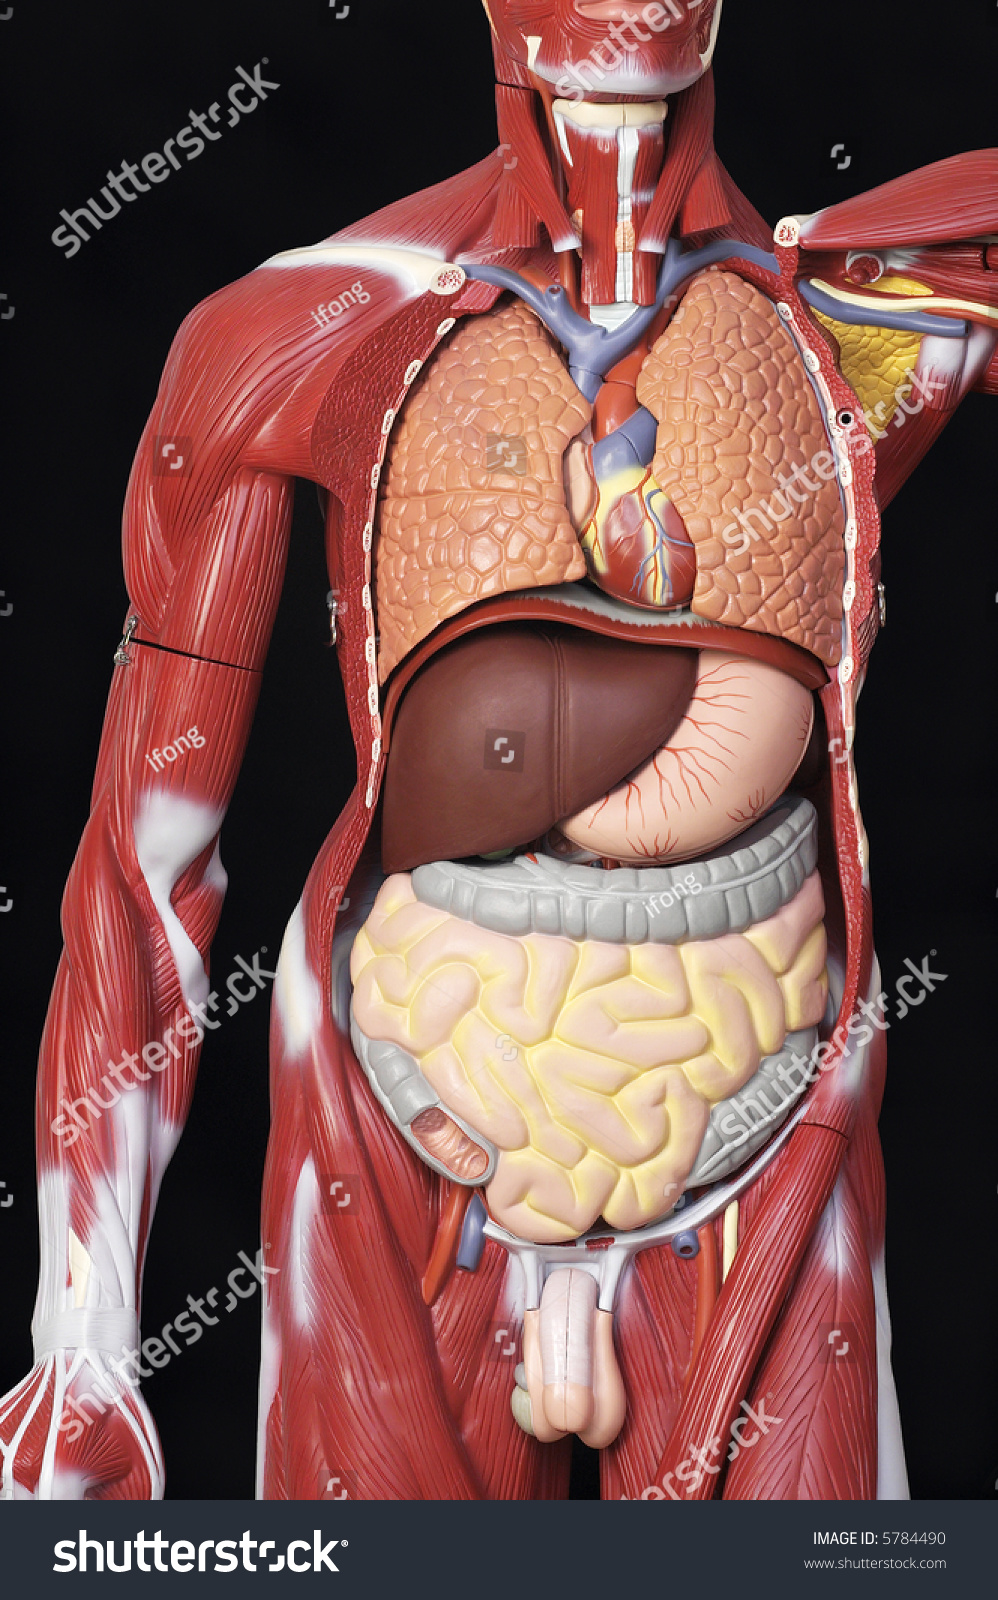 Dummy Of The Body And Organs Stock Photo 5784490 : Shutterstock